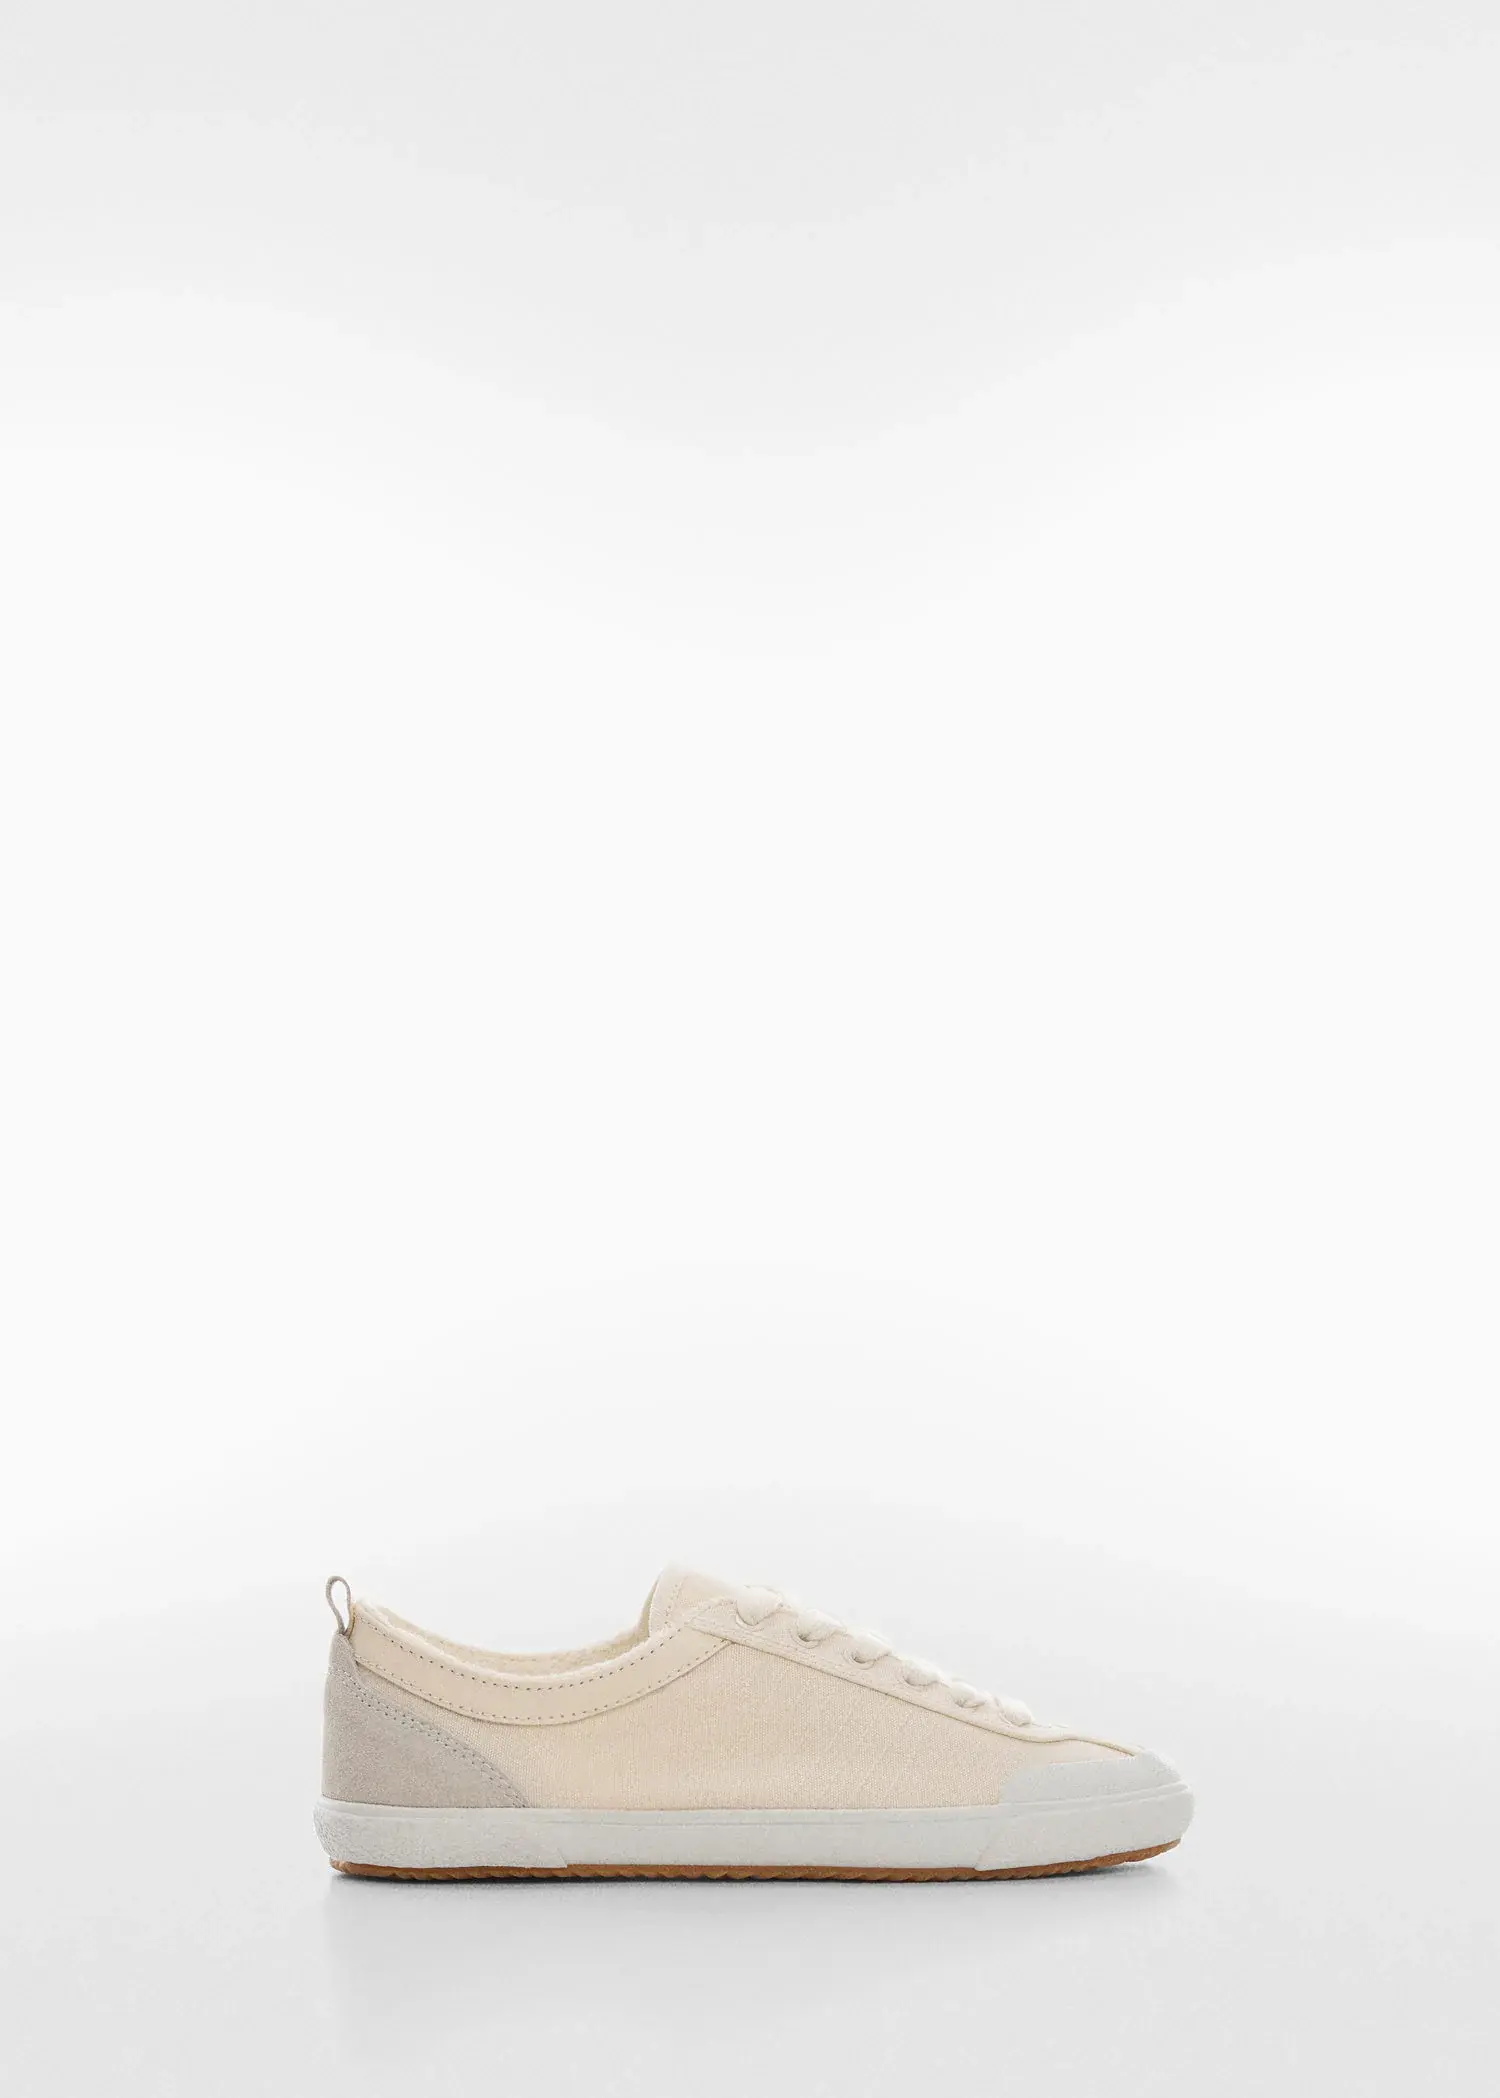 Mango Decorative seam sneakers. a pair of white shoes sitting on top of a white floor. 